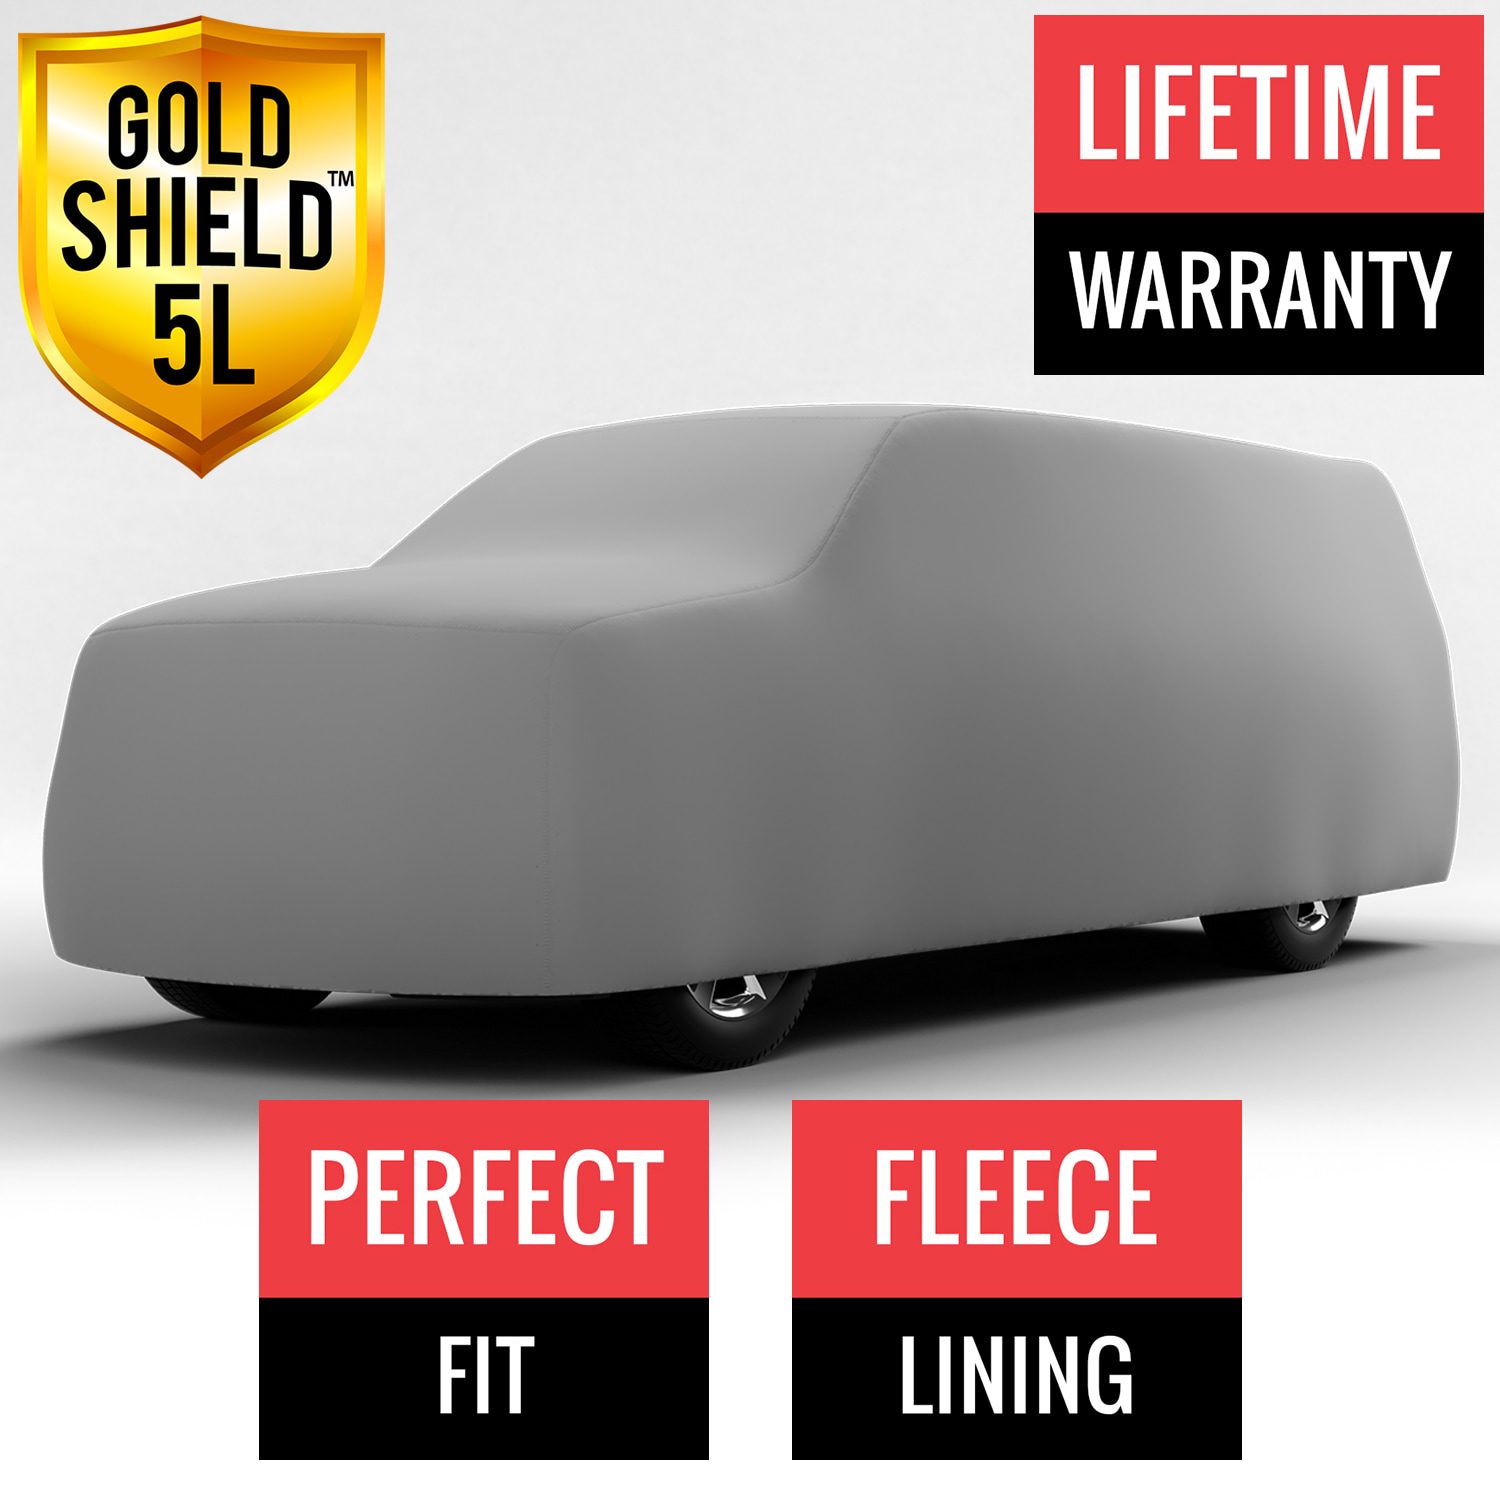 Gold Shield 5L - Car Cover for GMC C1500 1997 Regular Cab Pickup 6.5 Feet Bed with Camper Shell